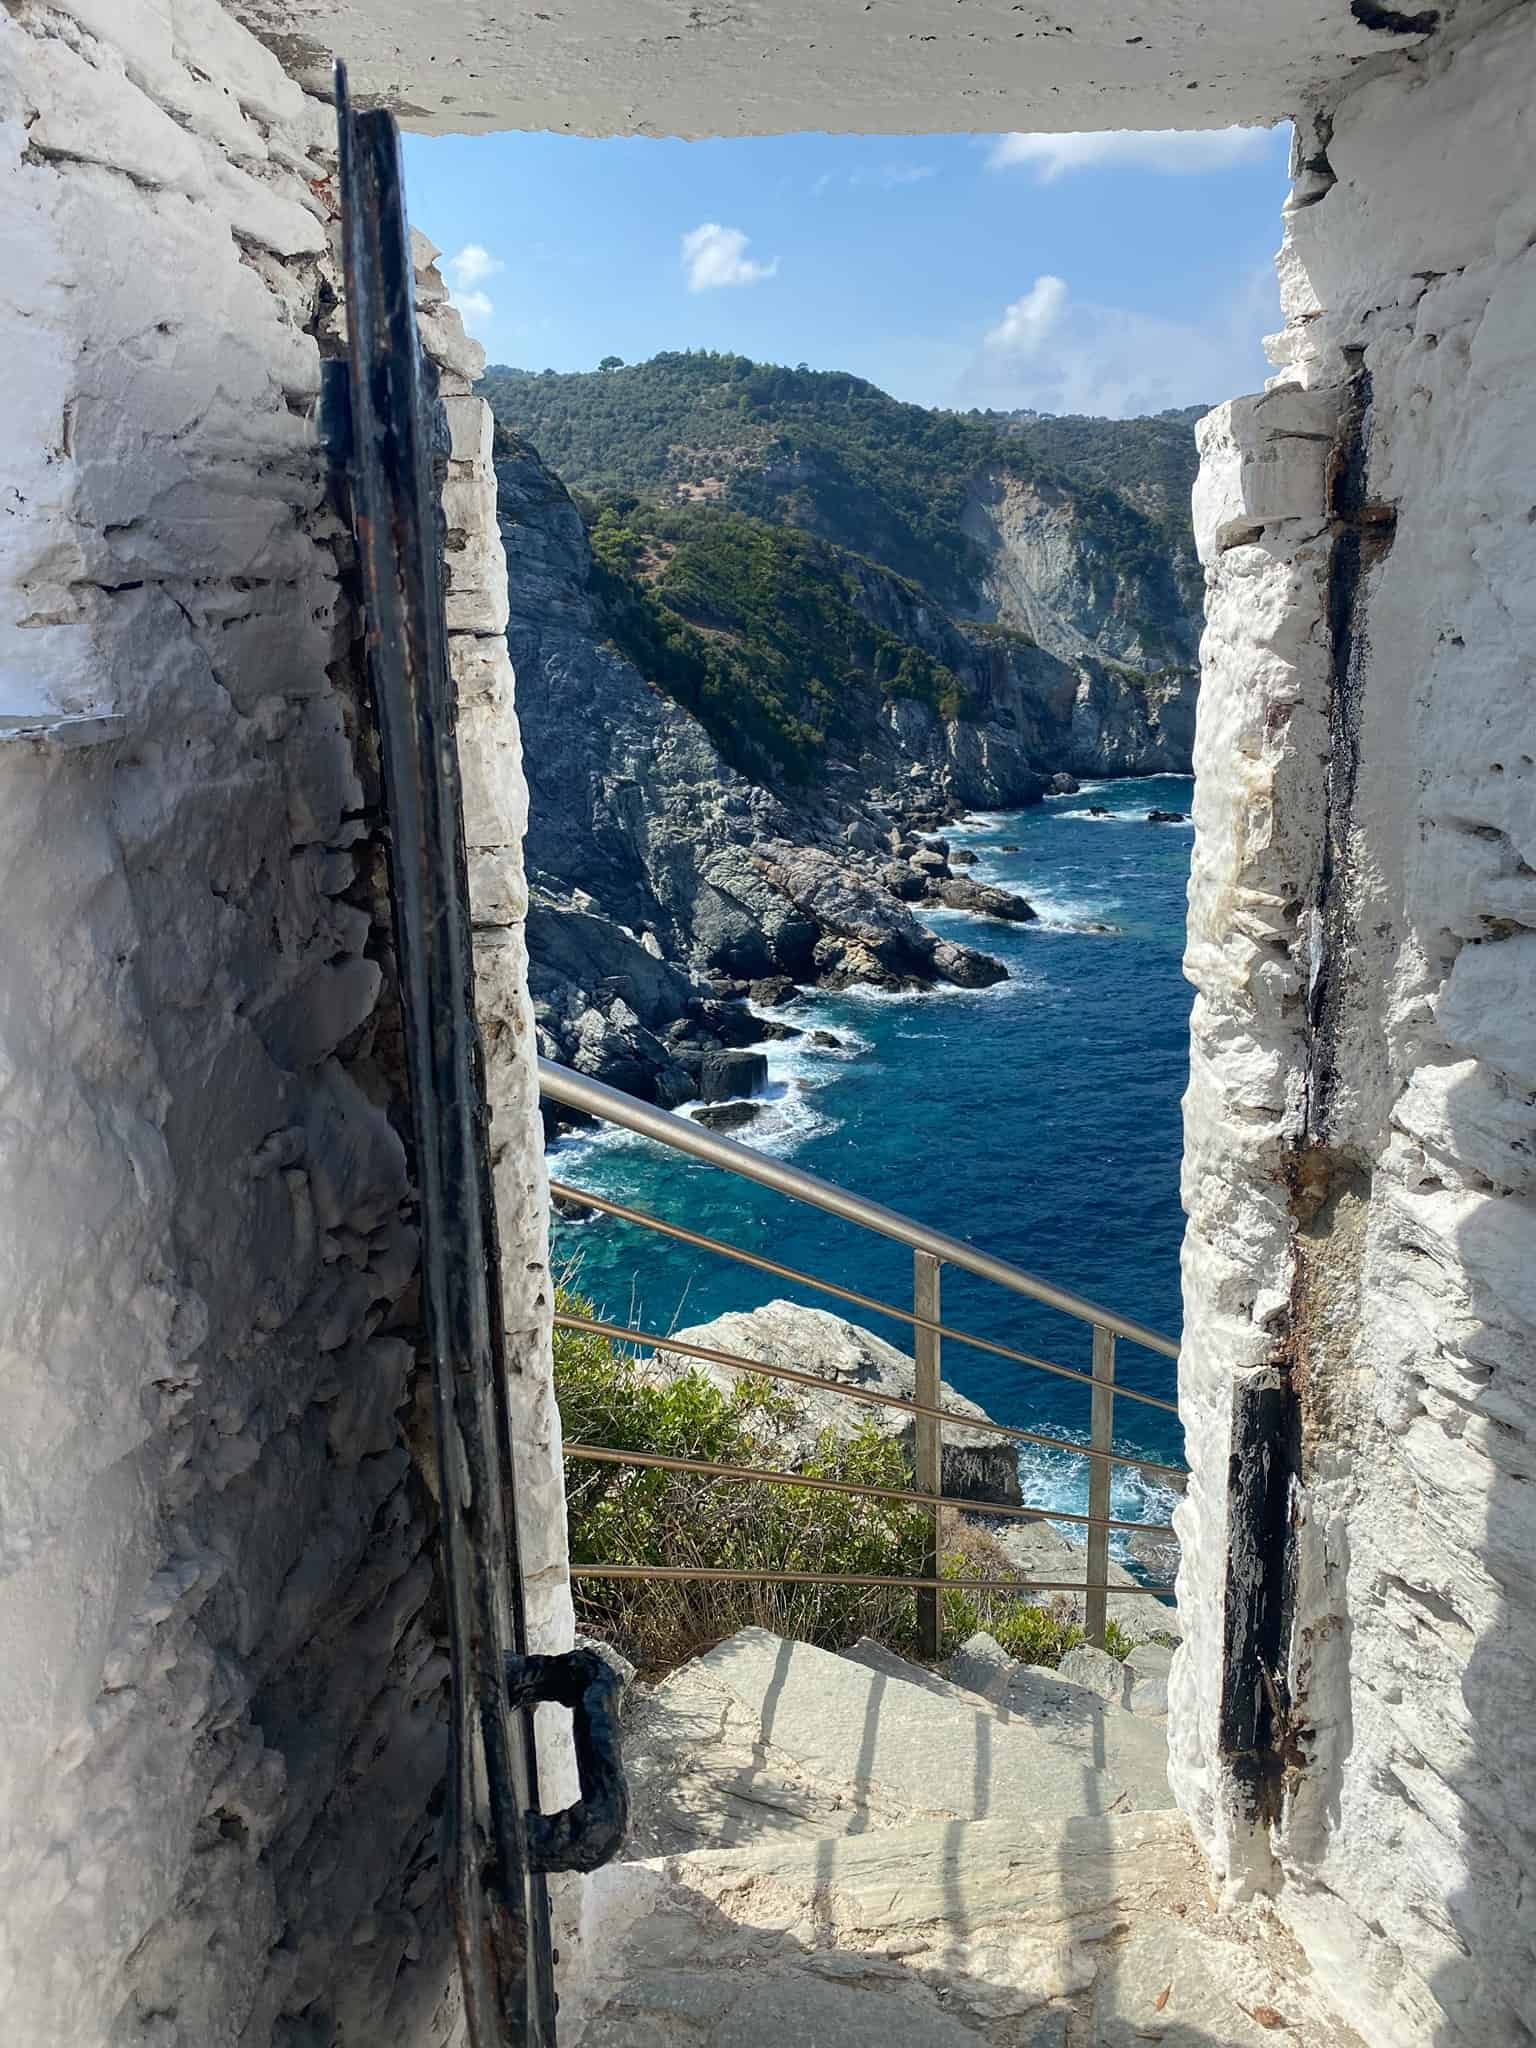 The view from the "Mamma Mia" church